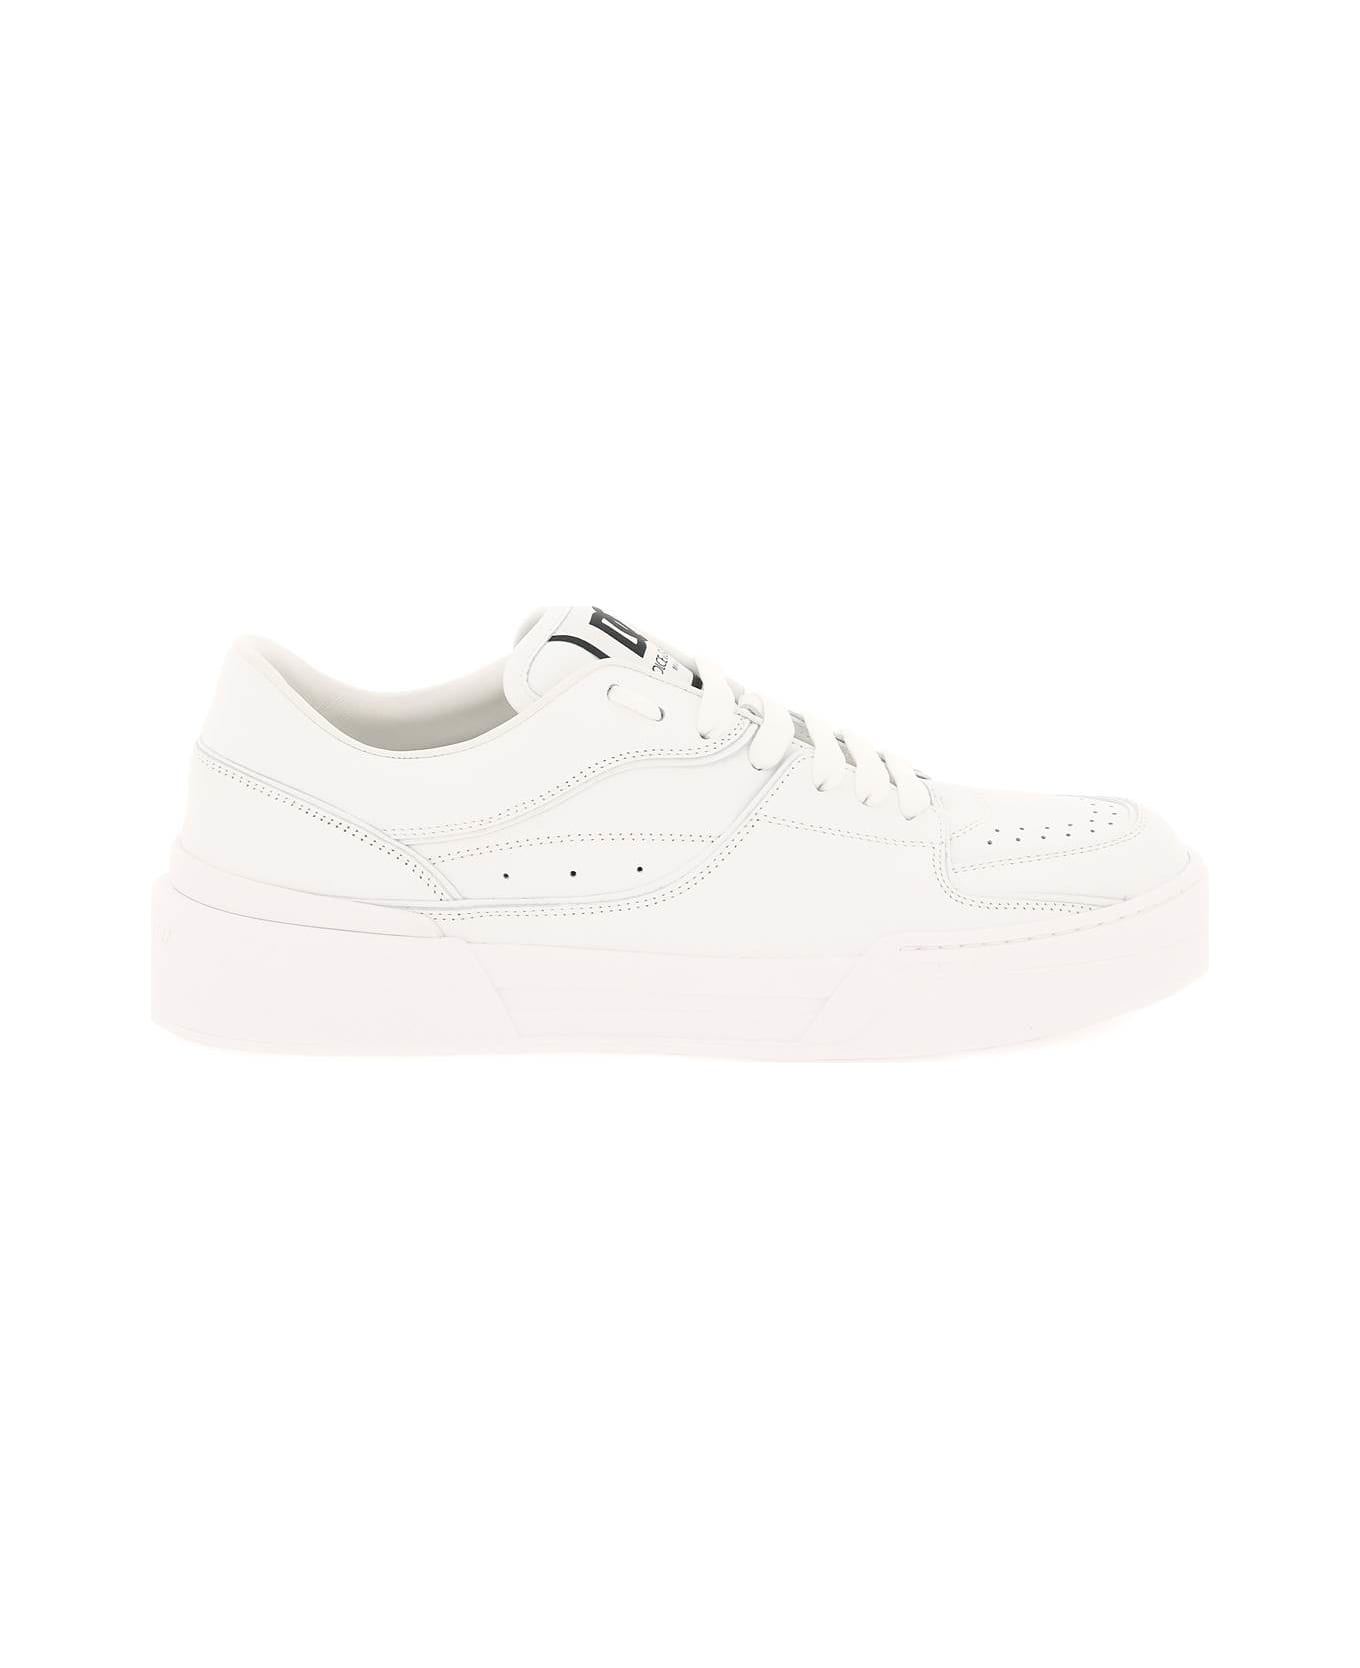 Dolce & Gabbana New Roma Leather Sneakers - Bianco